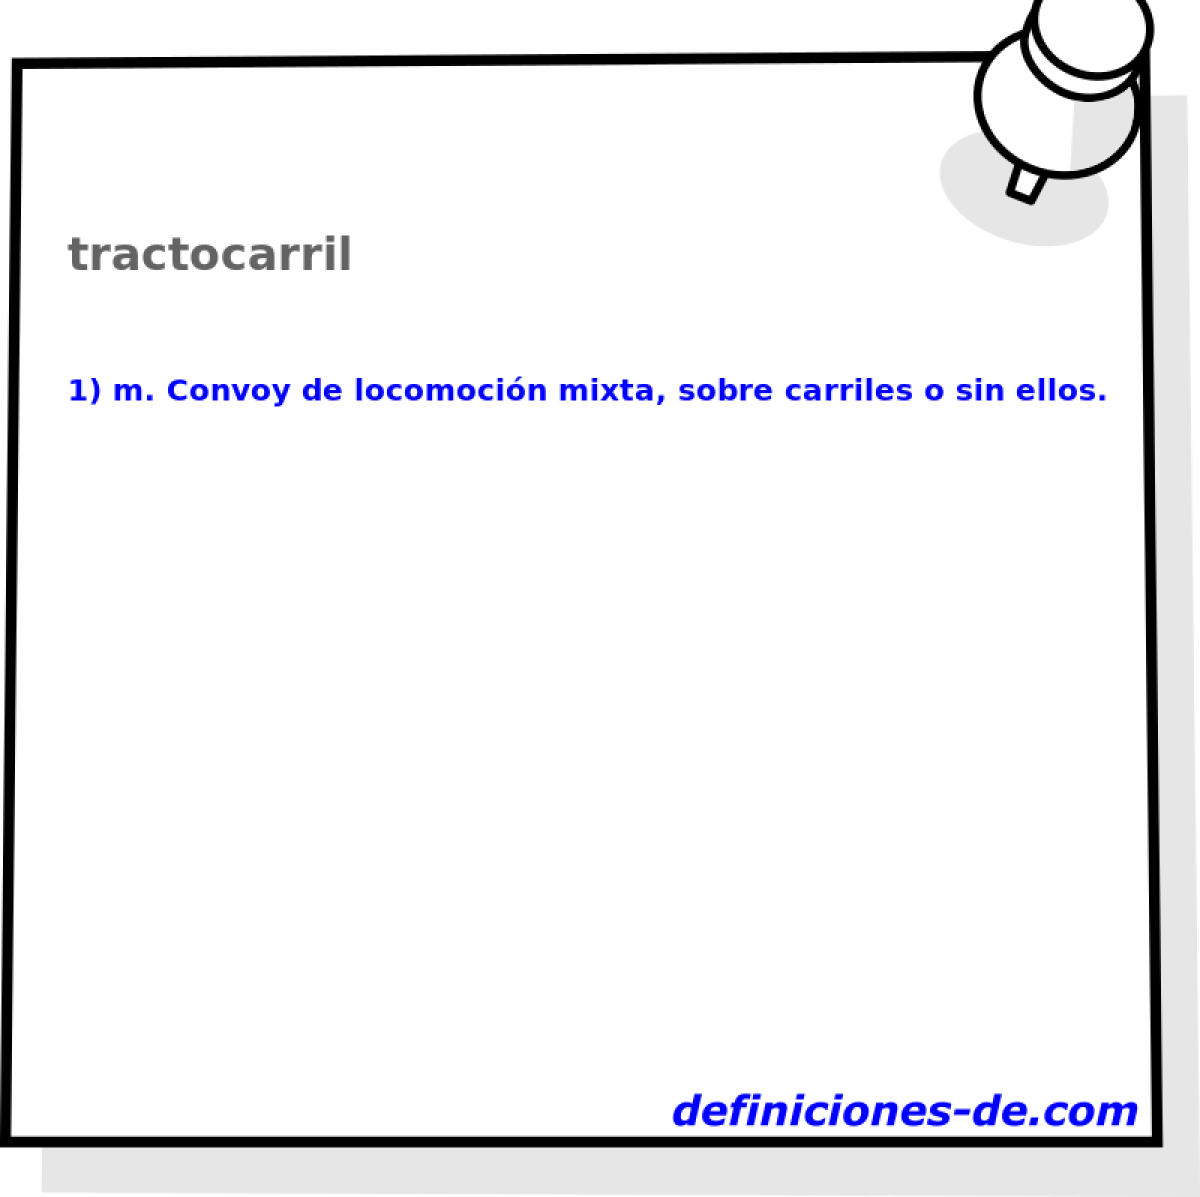 tractocarril 